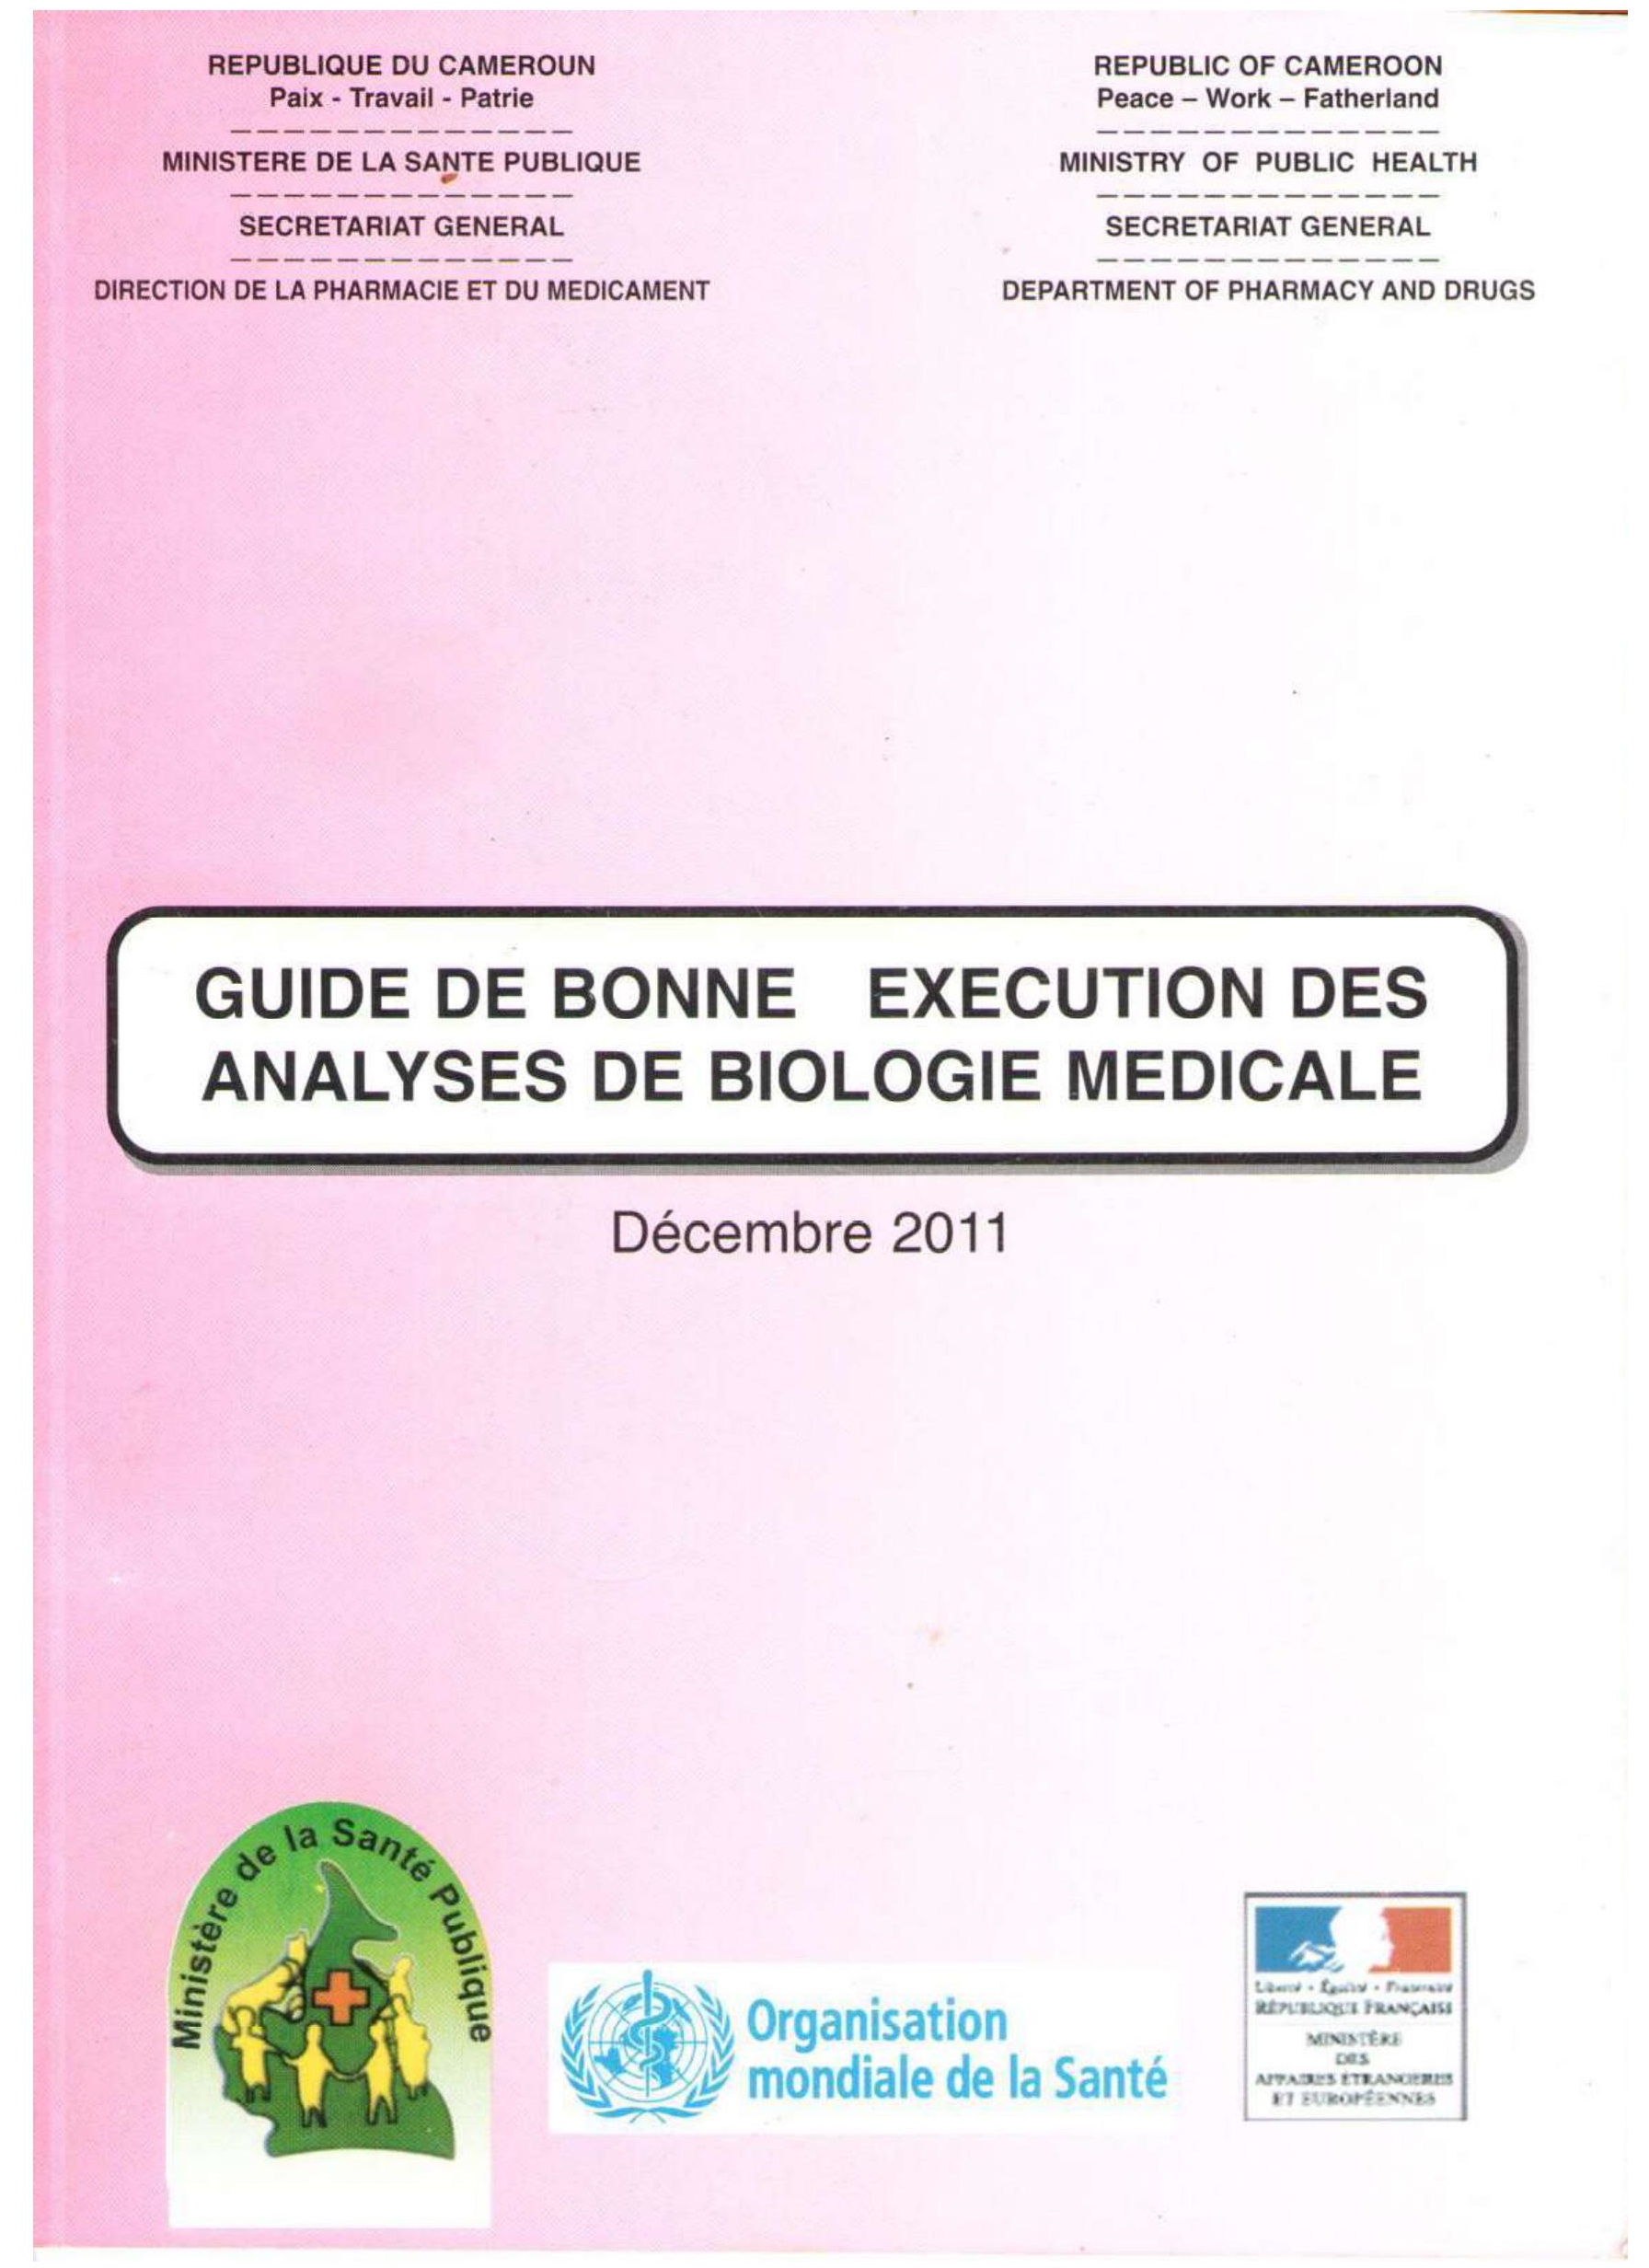 GUIDE BONNE EXECUTION ANALYSE BIOLOGIE MEDICALE